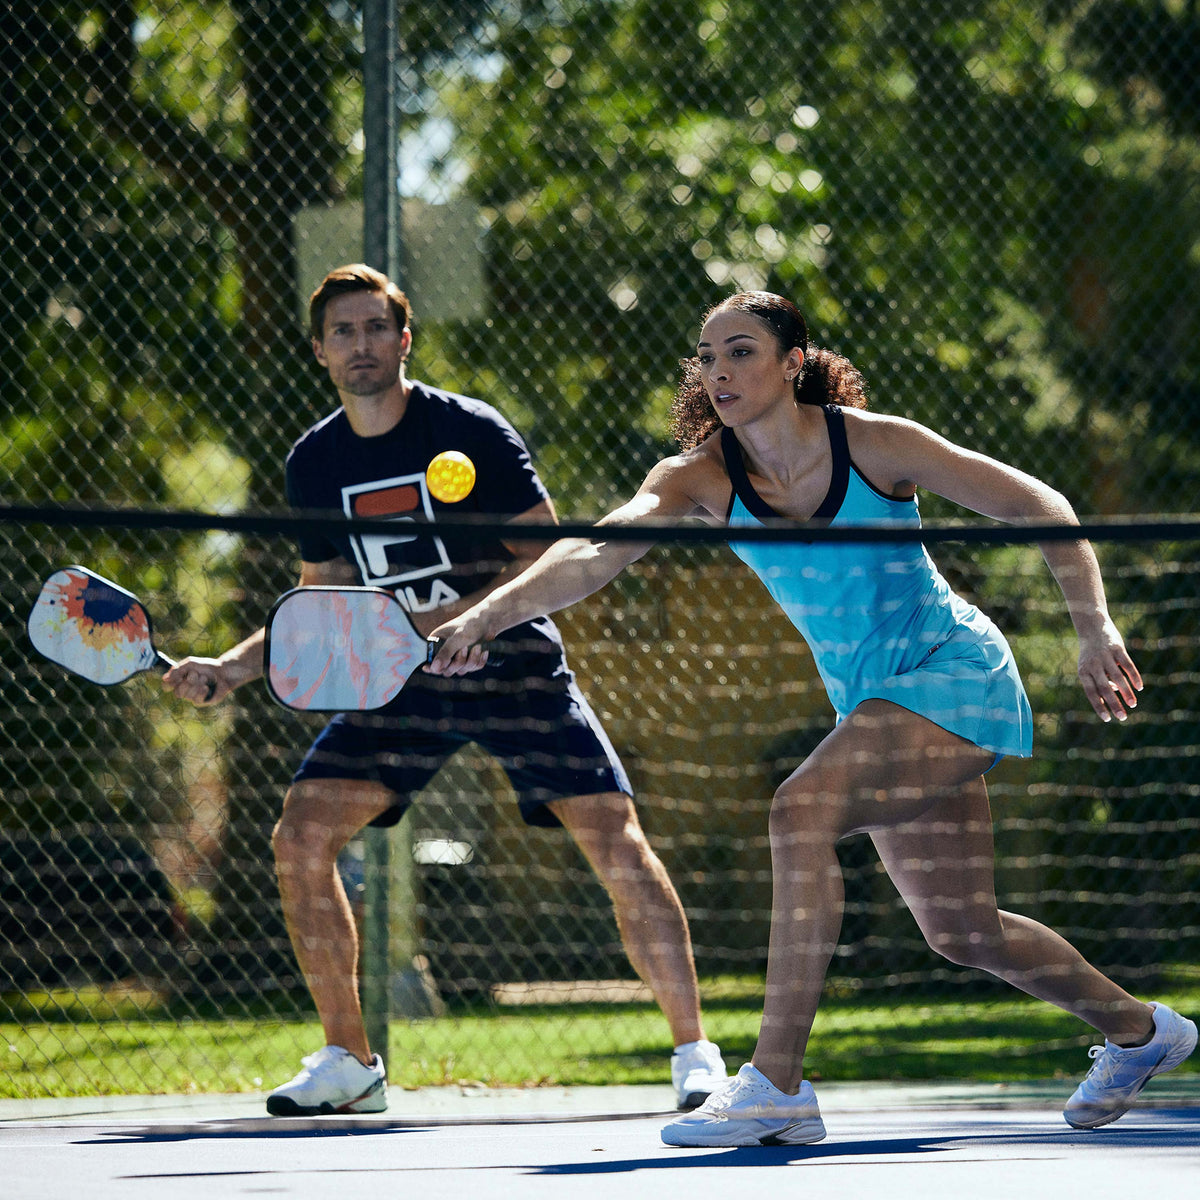 Two people playing Pickleball